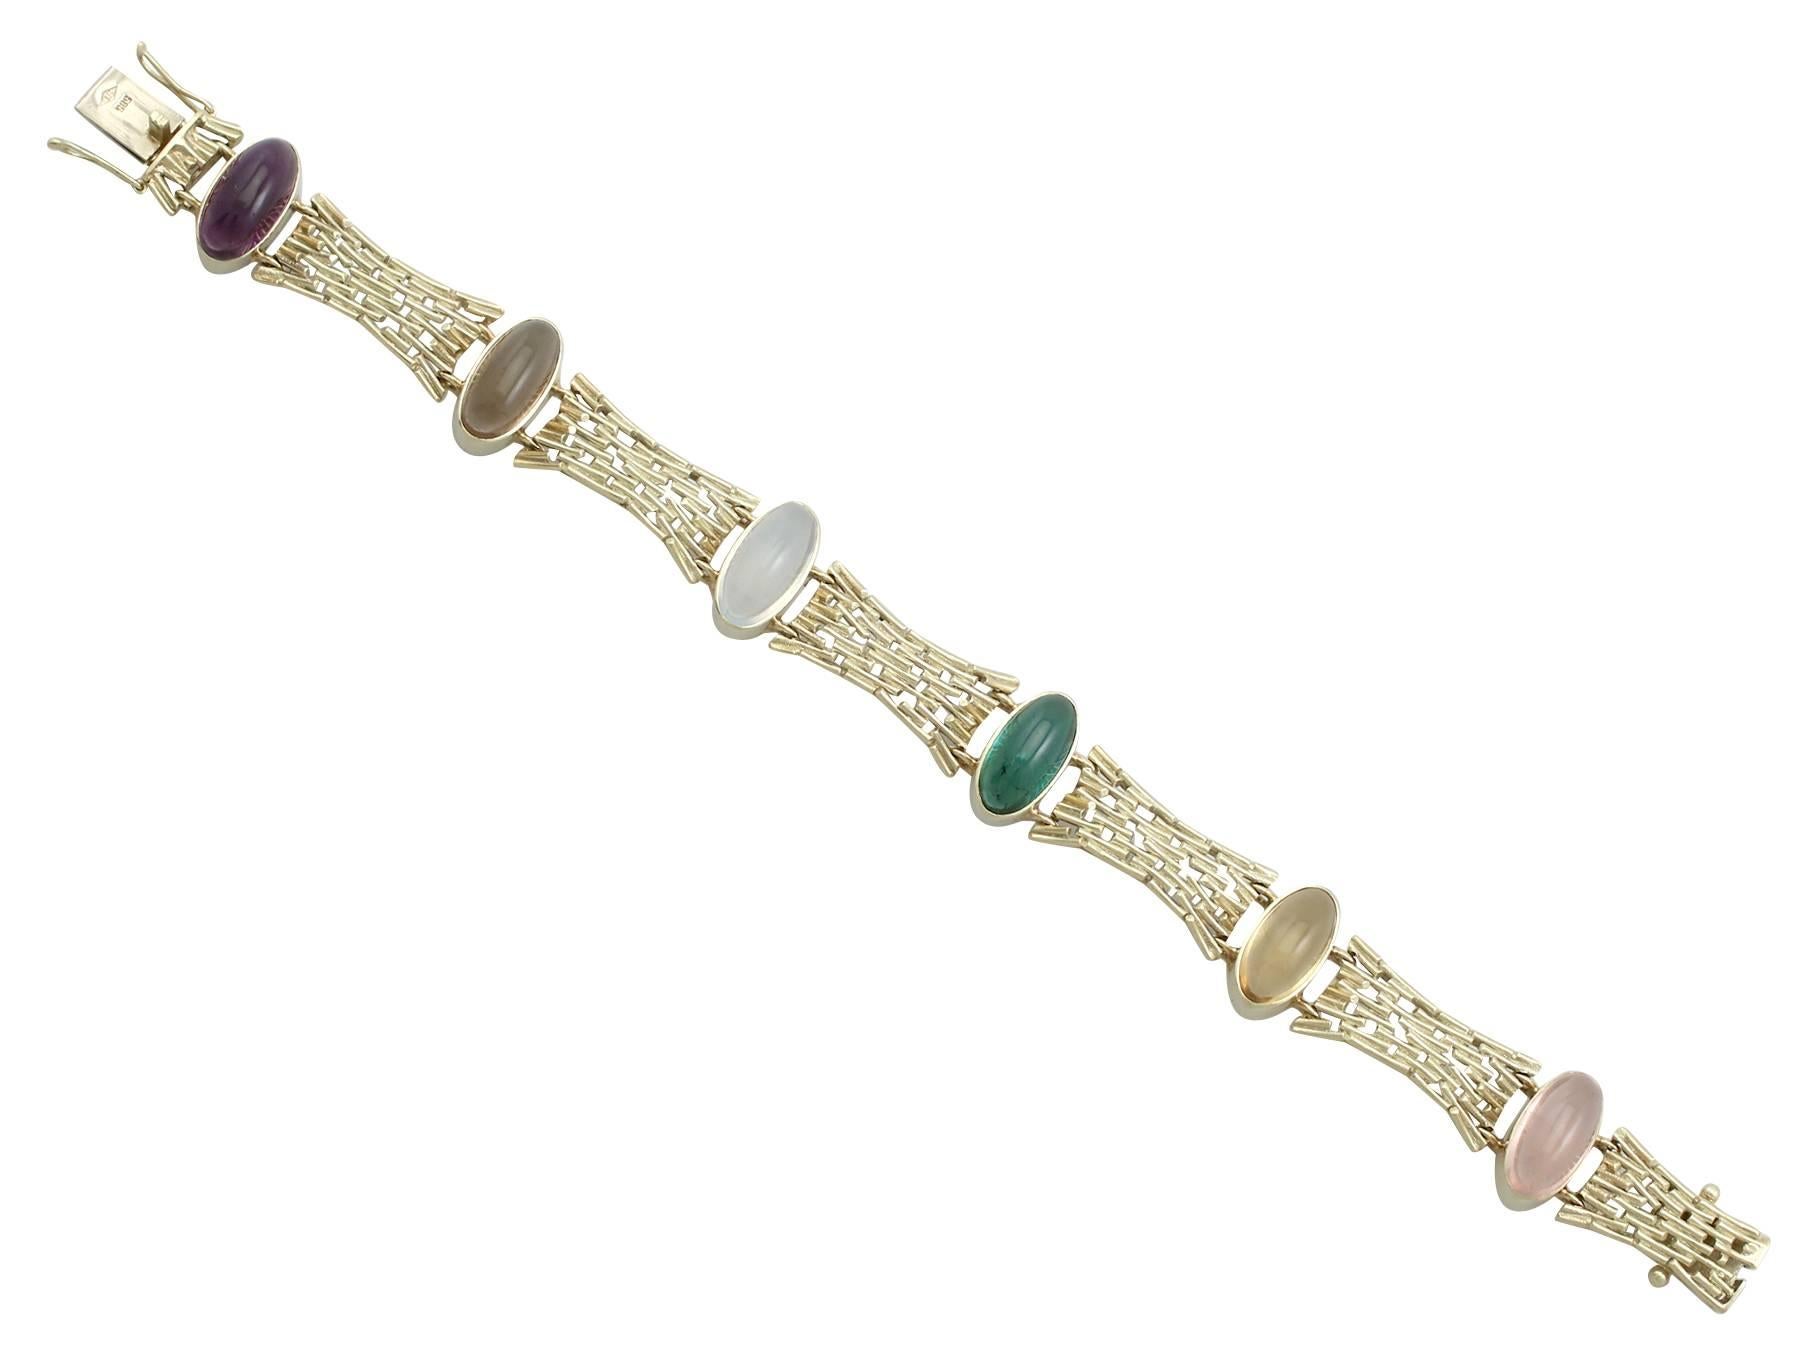 An impressive 15.27 carat amethyst, smoky quartz, moonstone, tourmaline, citrine, rose quartz and 14 karat yellow gold bracelet; part of our diverse gemstone jewellery collections. This fine and impressive multi gemstone bracelet has been crafted in